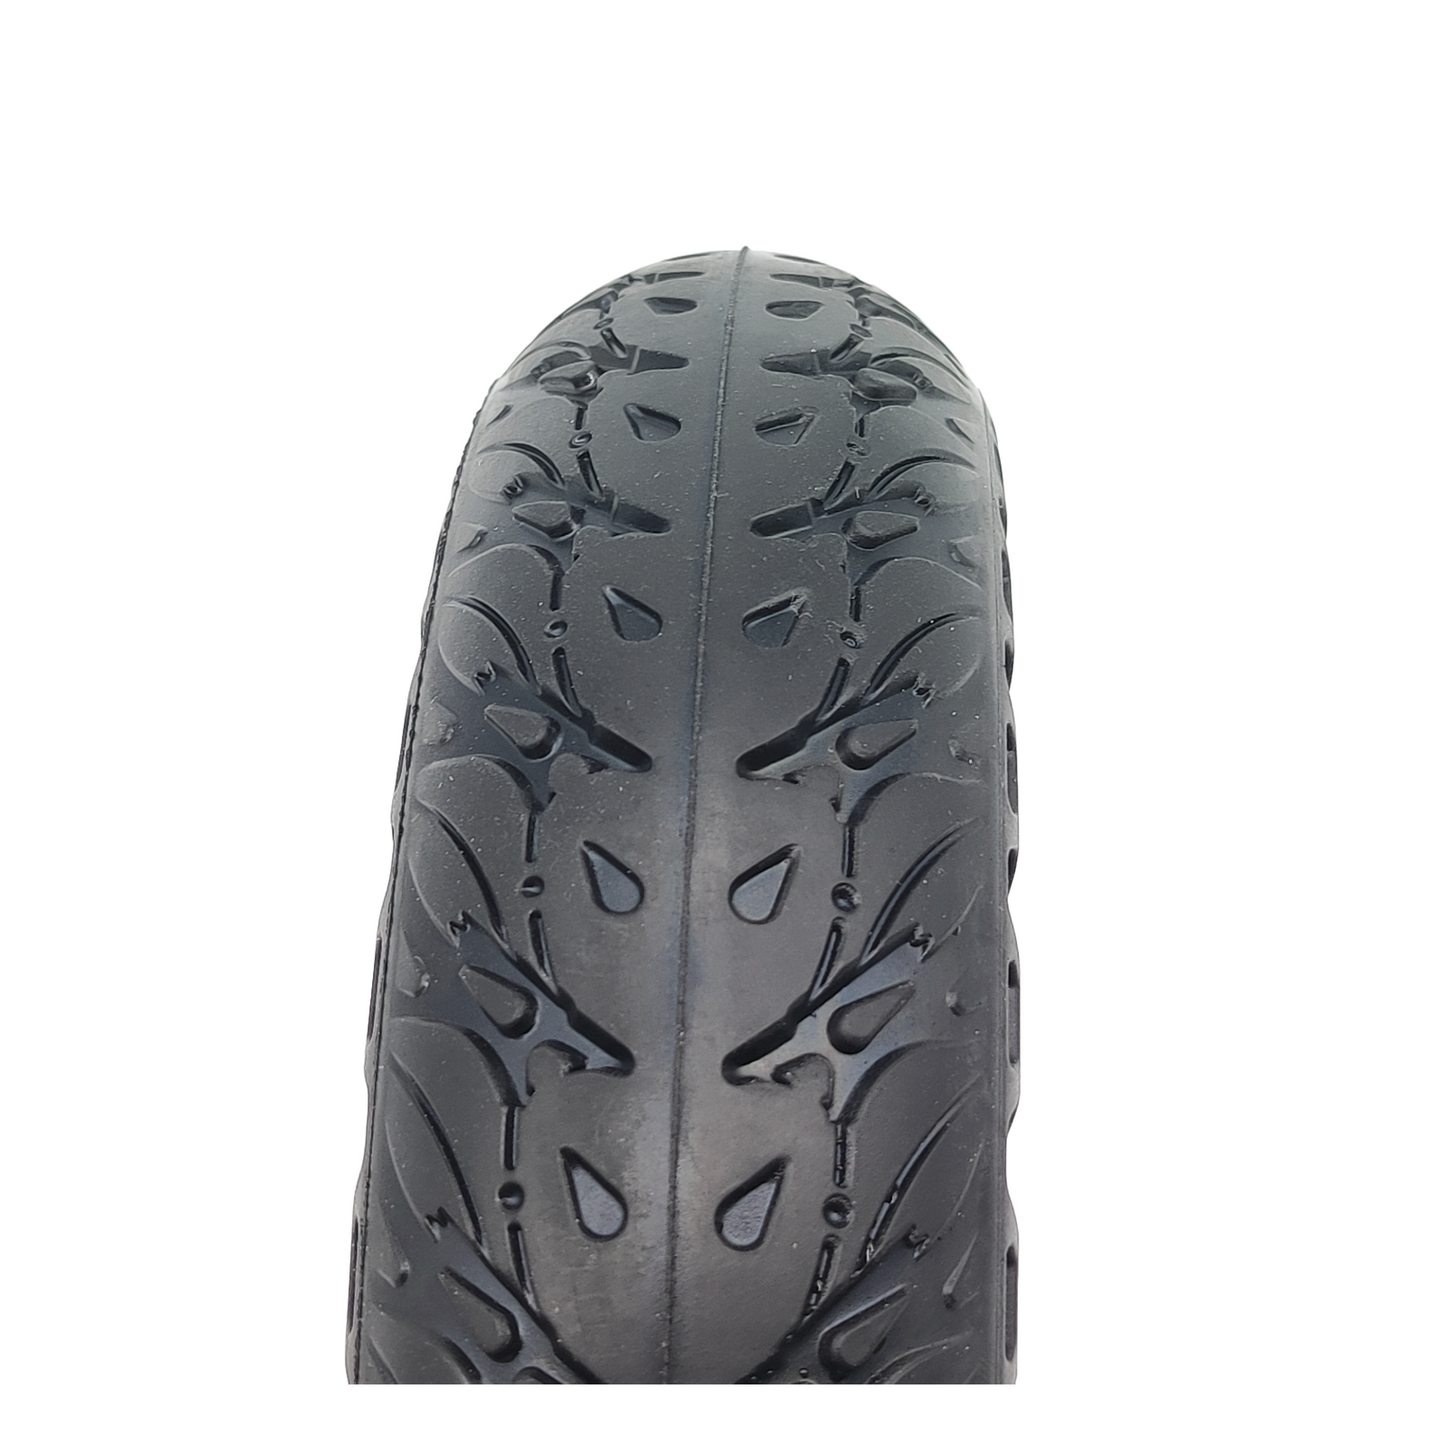 iScooter E9 Pro E9 solid rubber honeycomb soft 8.5x2 inch tires